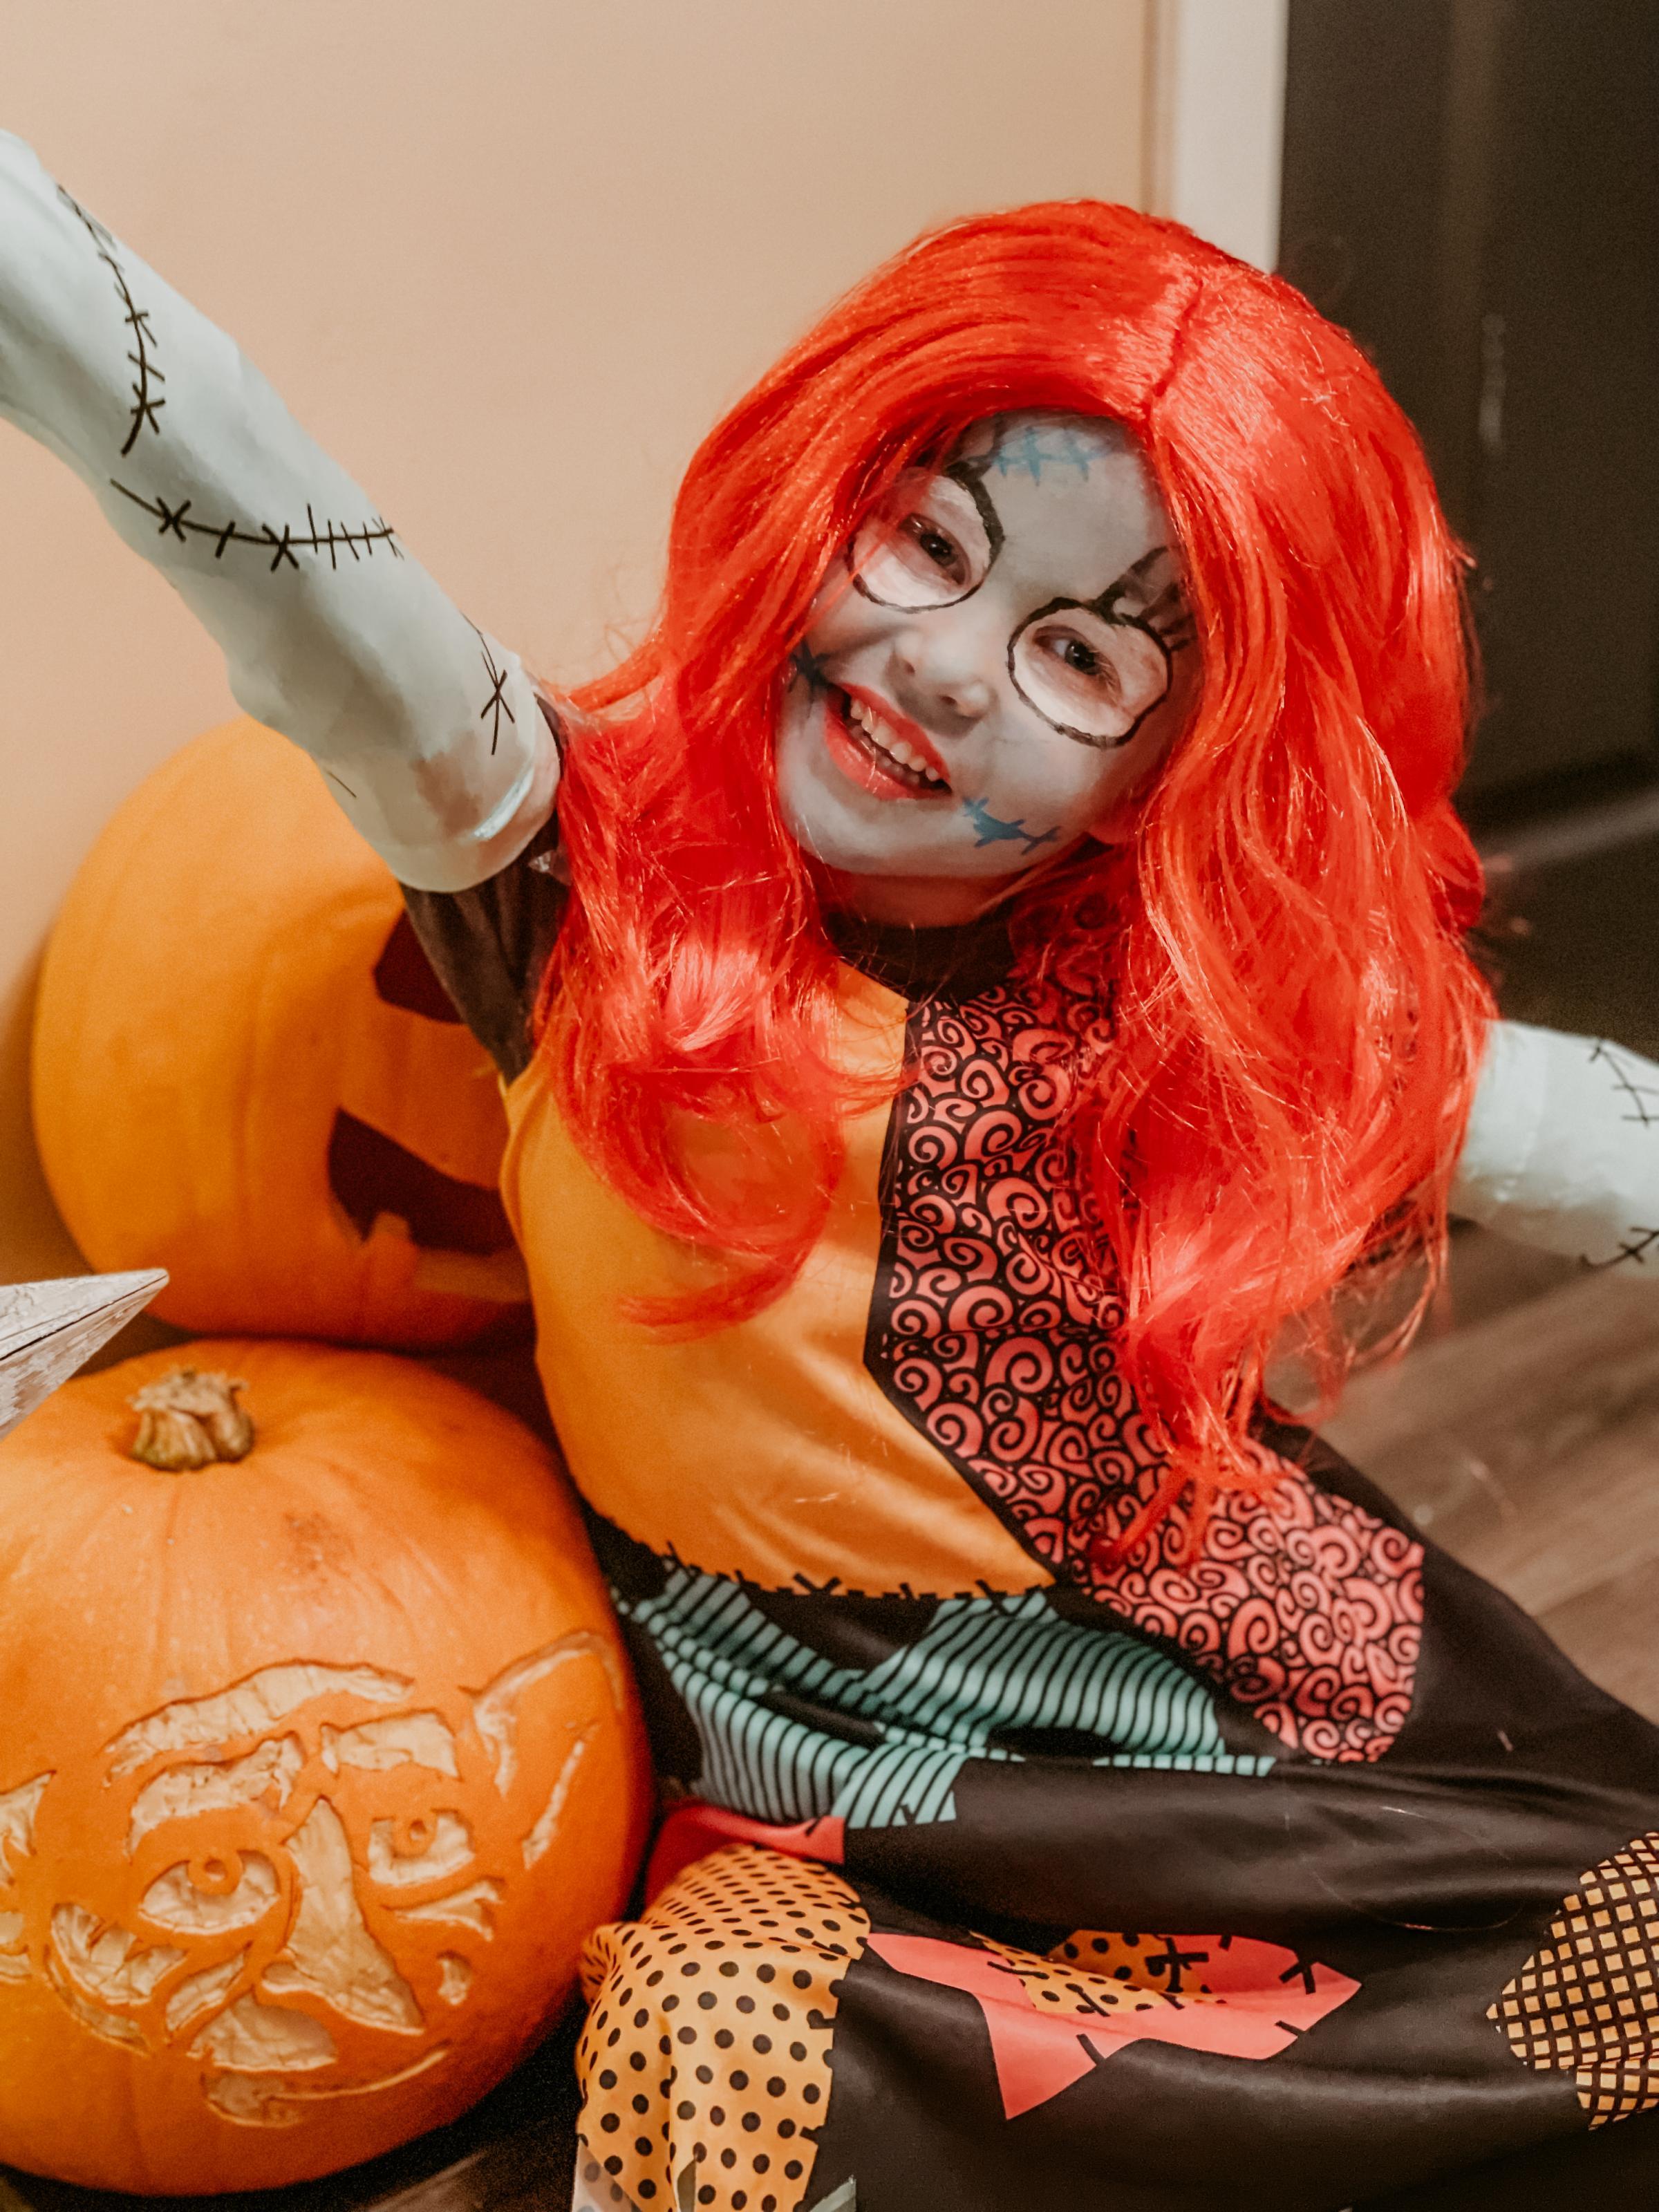 Tilly Barron from Winsford dressed as Sally from The Nightmare Before Christmas